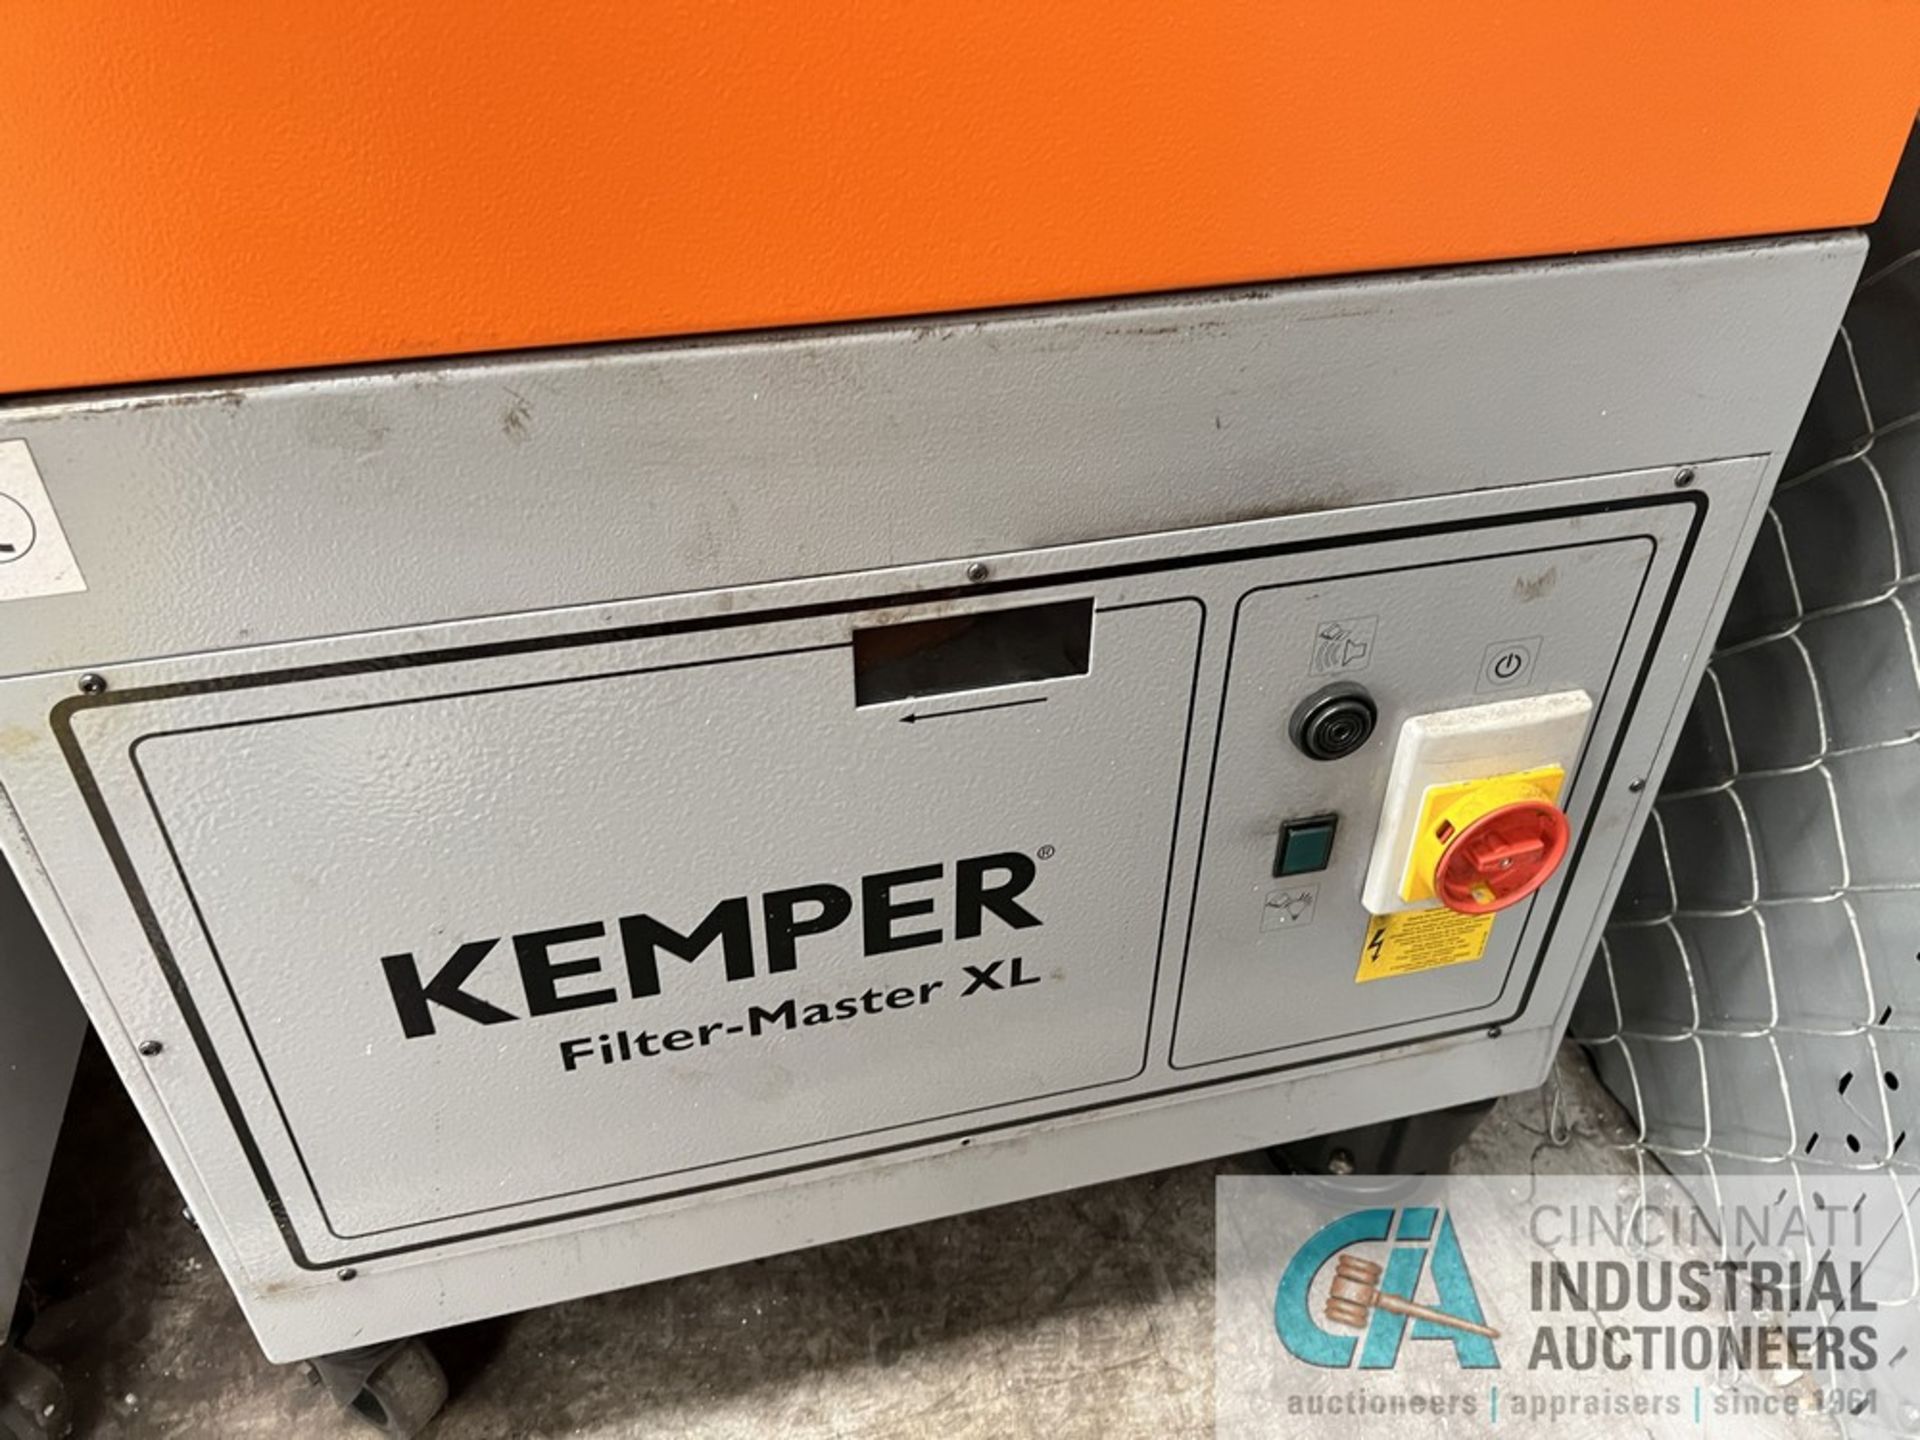 KEMPER FILTER MASTER XL WELDING FUME EXTRACTOR; S/N 200300262 (2020) (OUTBACK) - Image 2 of 3